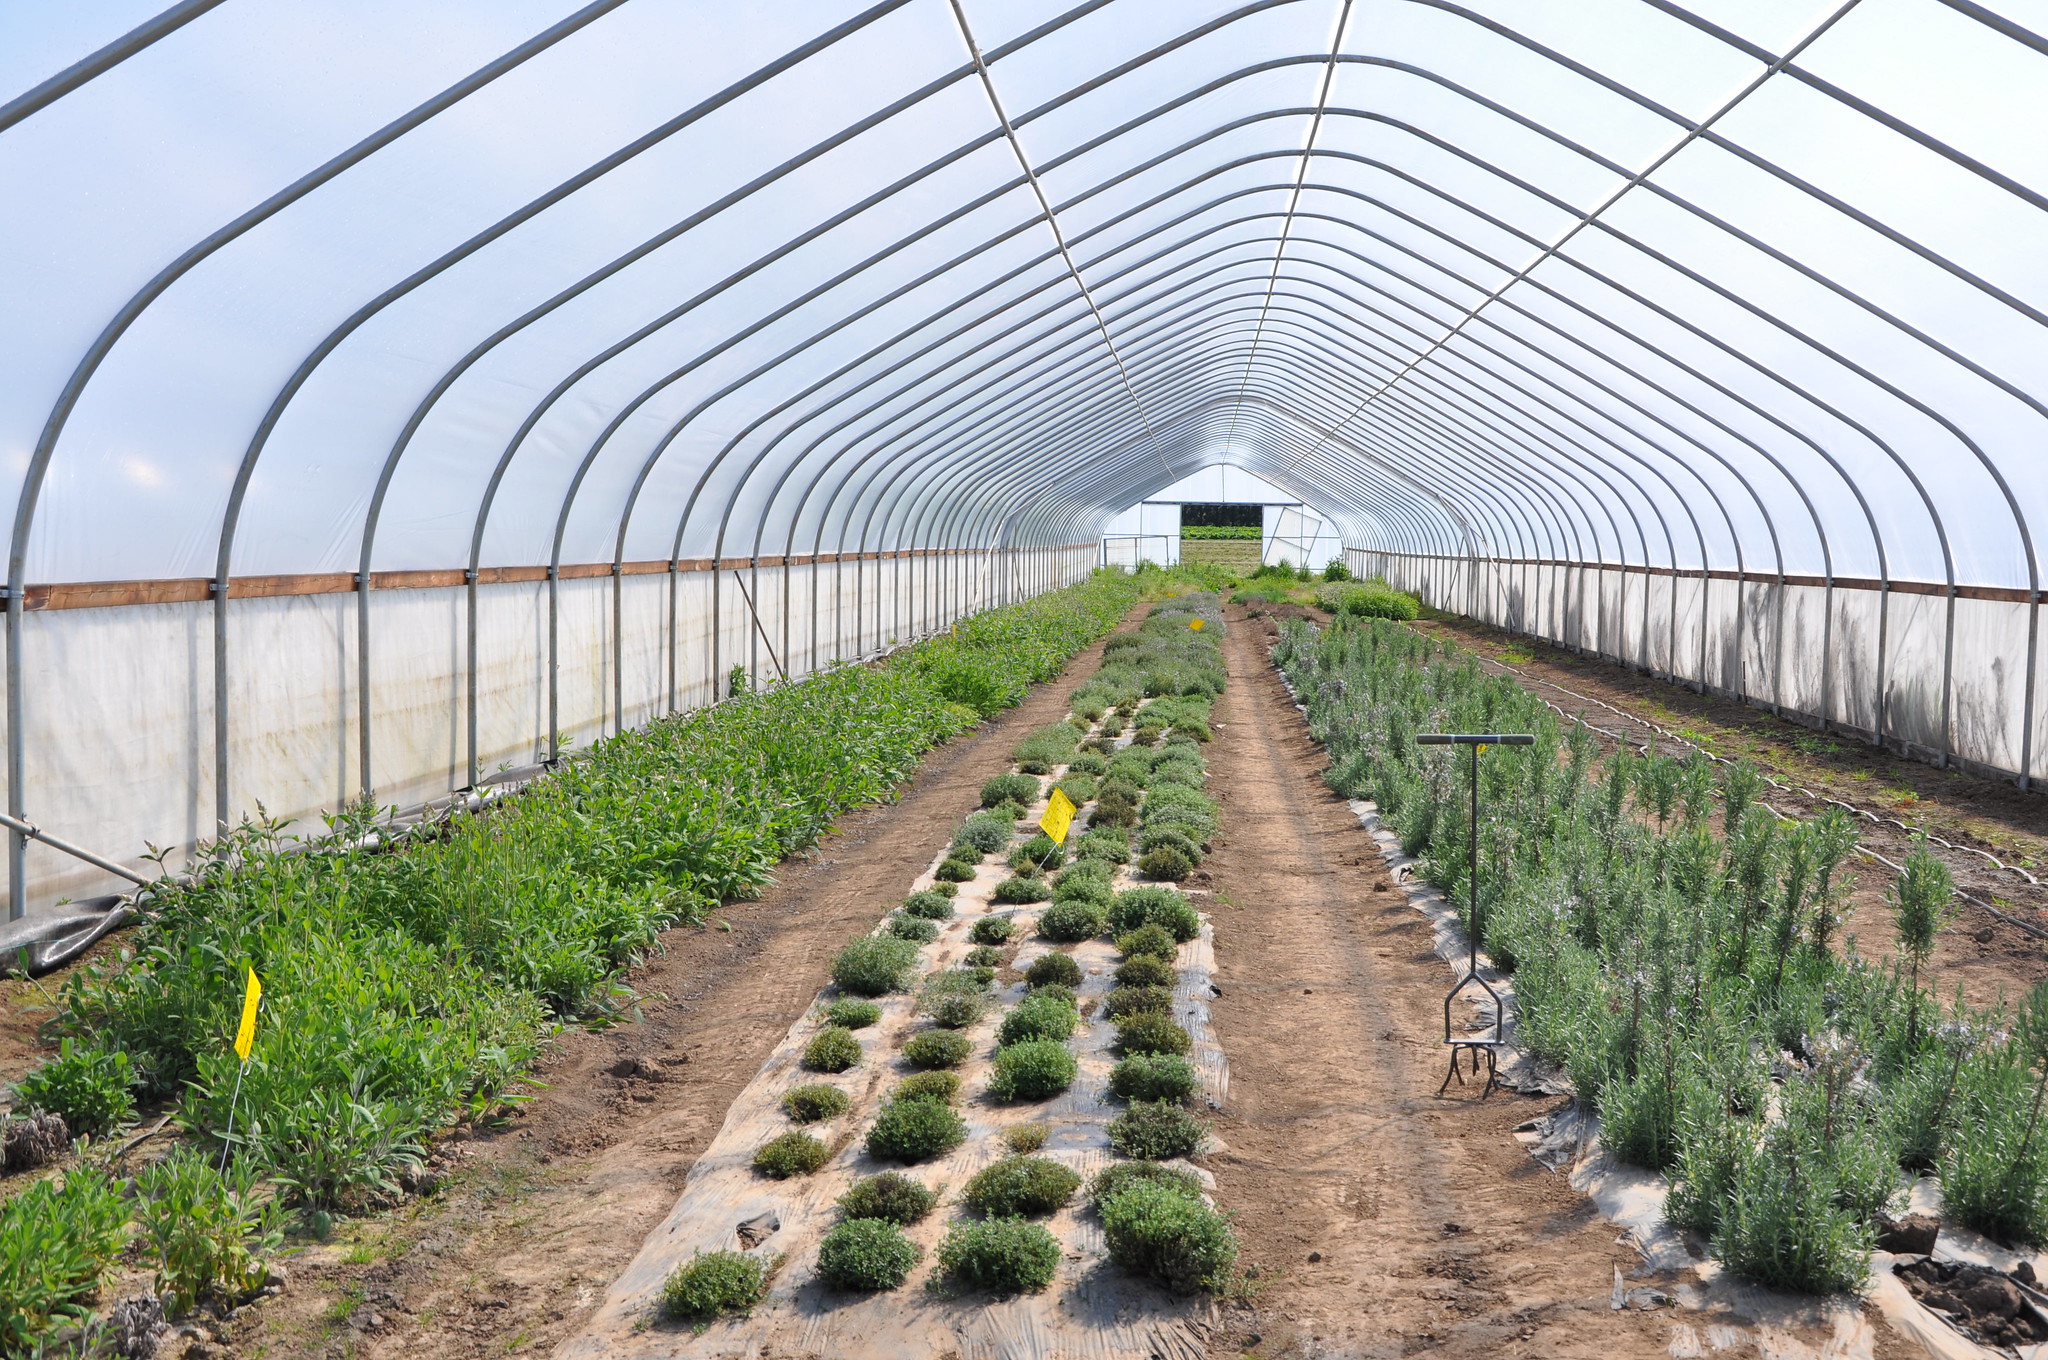 A high tunnel looms over green vegetables in rows.